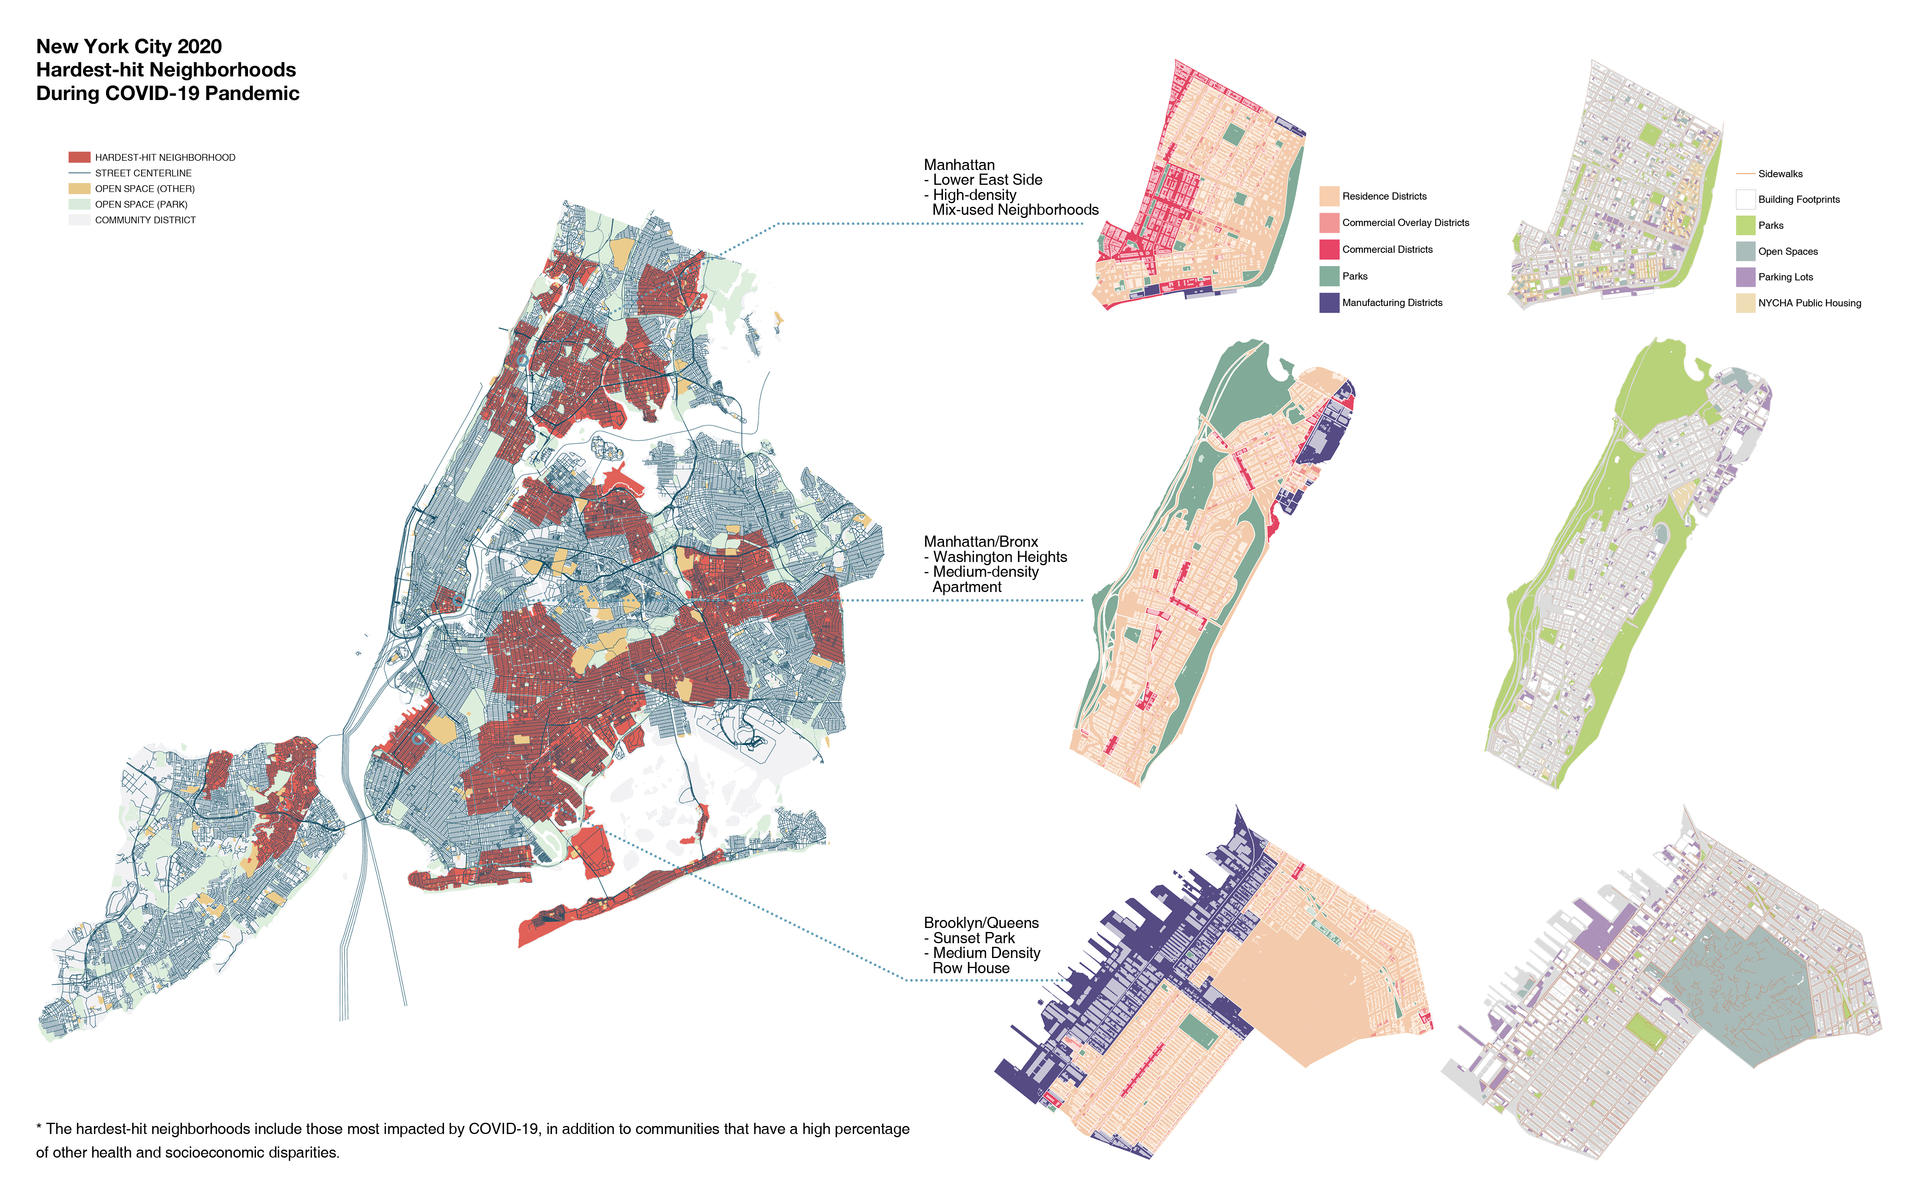 A mapping of the existing urban open space distribution with the hardest-hit neighborhoods of NYC during the COVID-19 pandemic, and three typical districts.